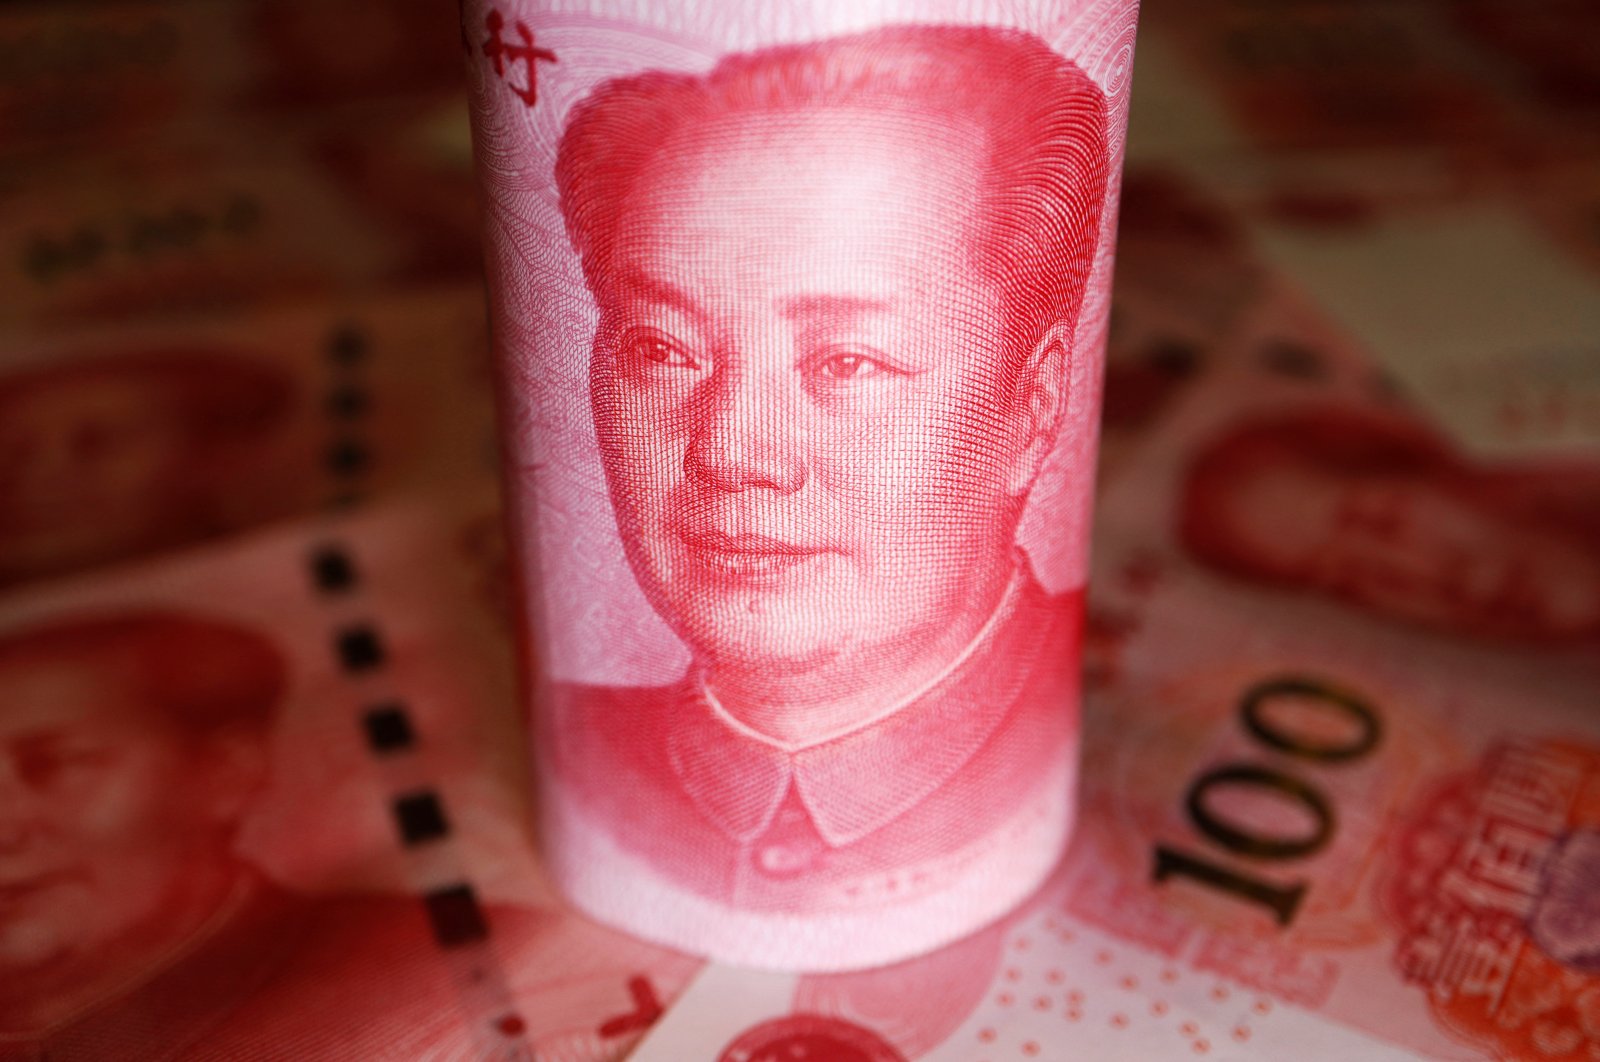 Chinese yuan banknotes are seen in this illustration picture taken on June 14, 2022. (Reuters Photo)